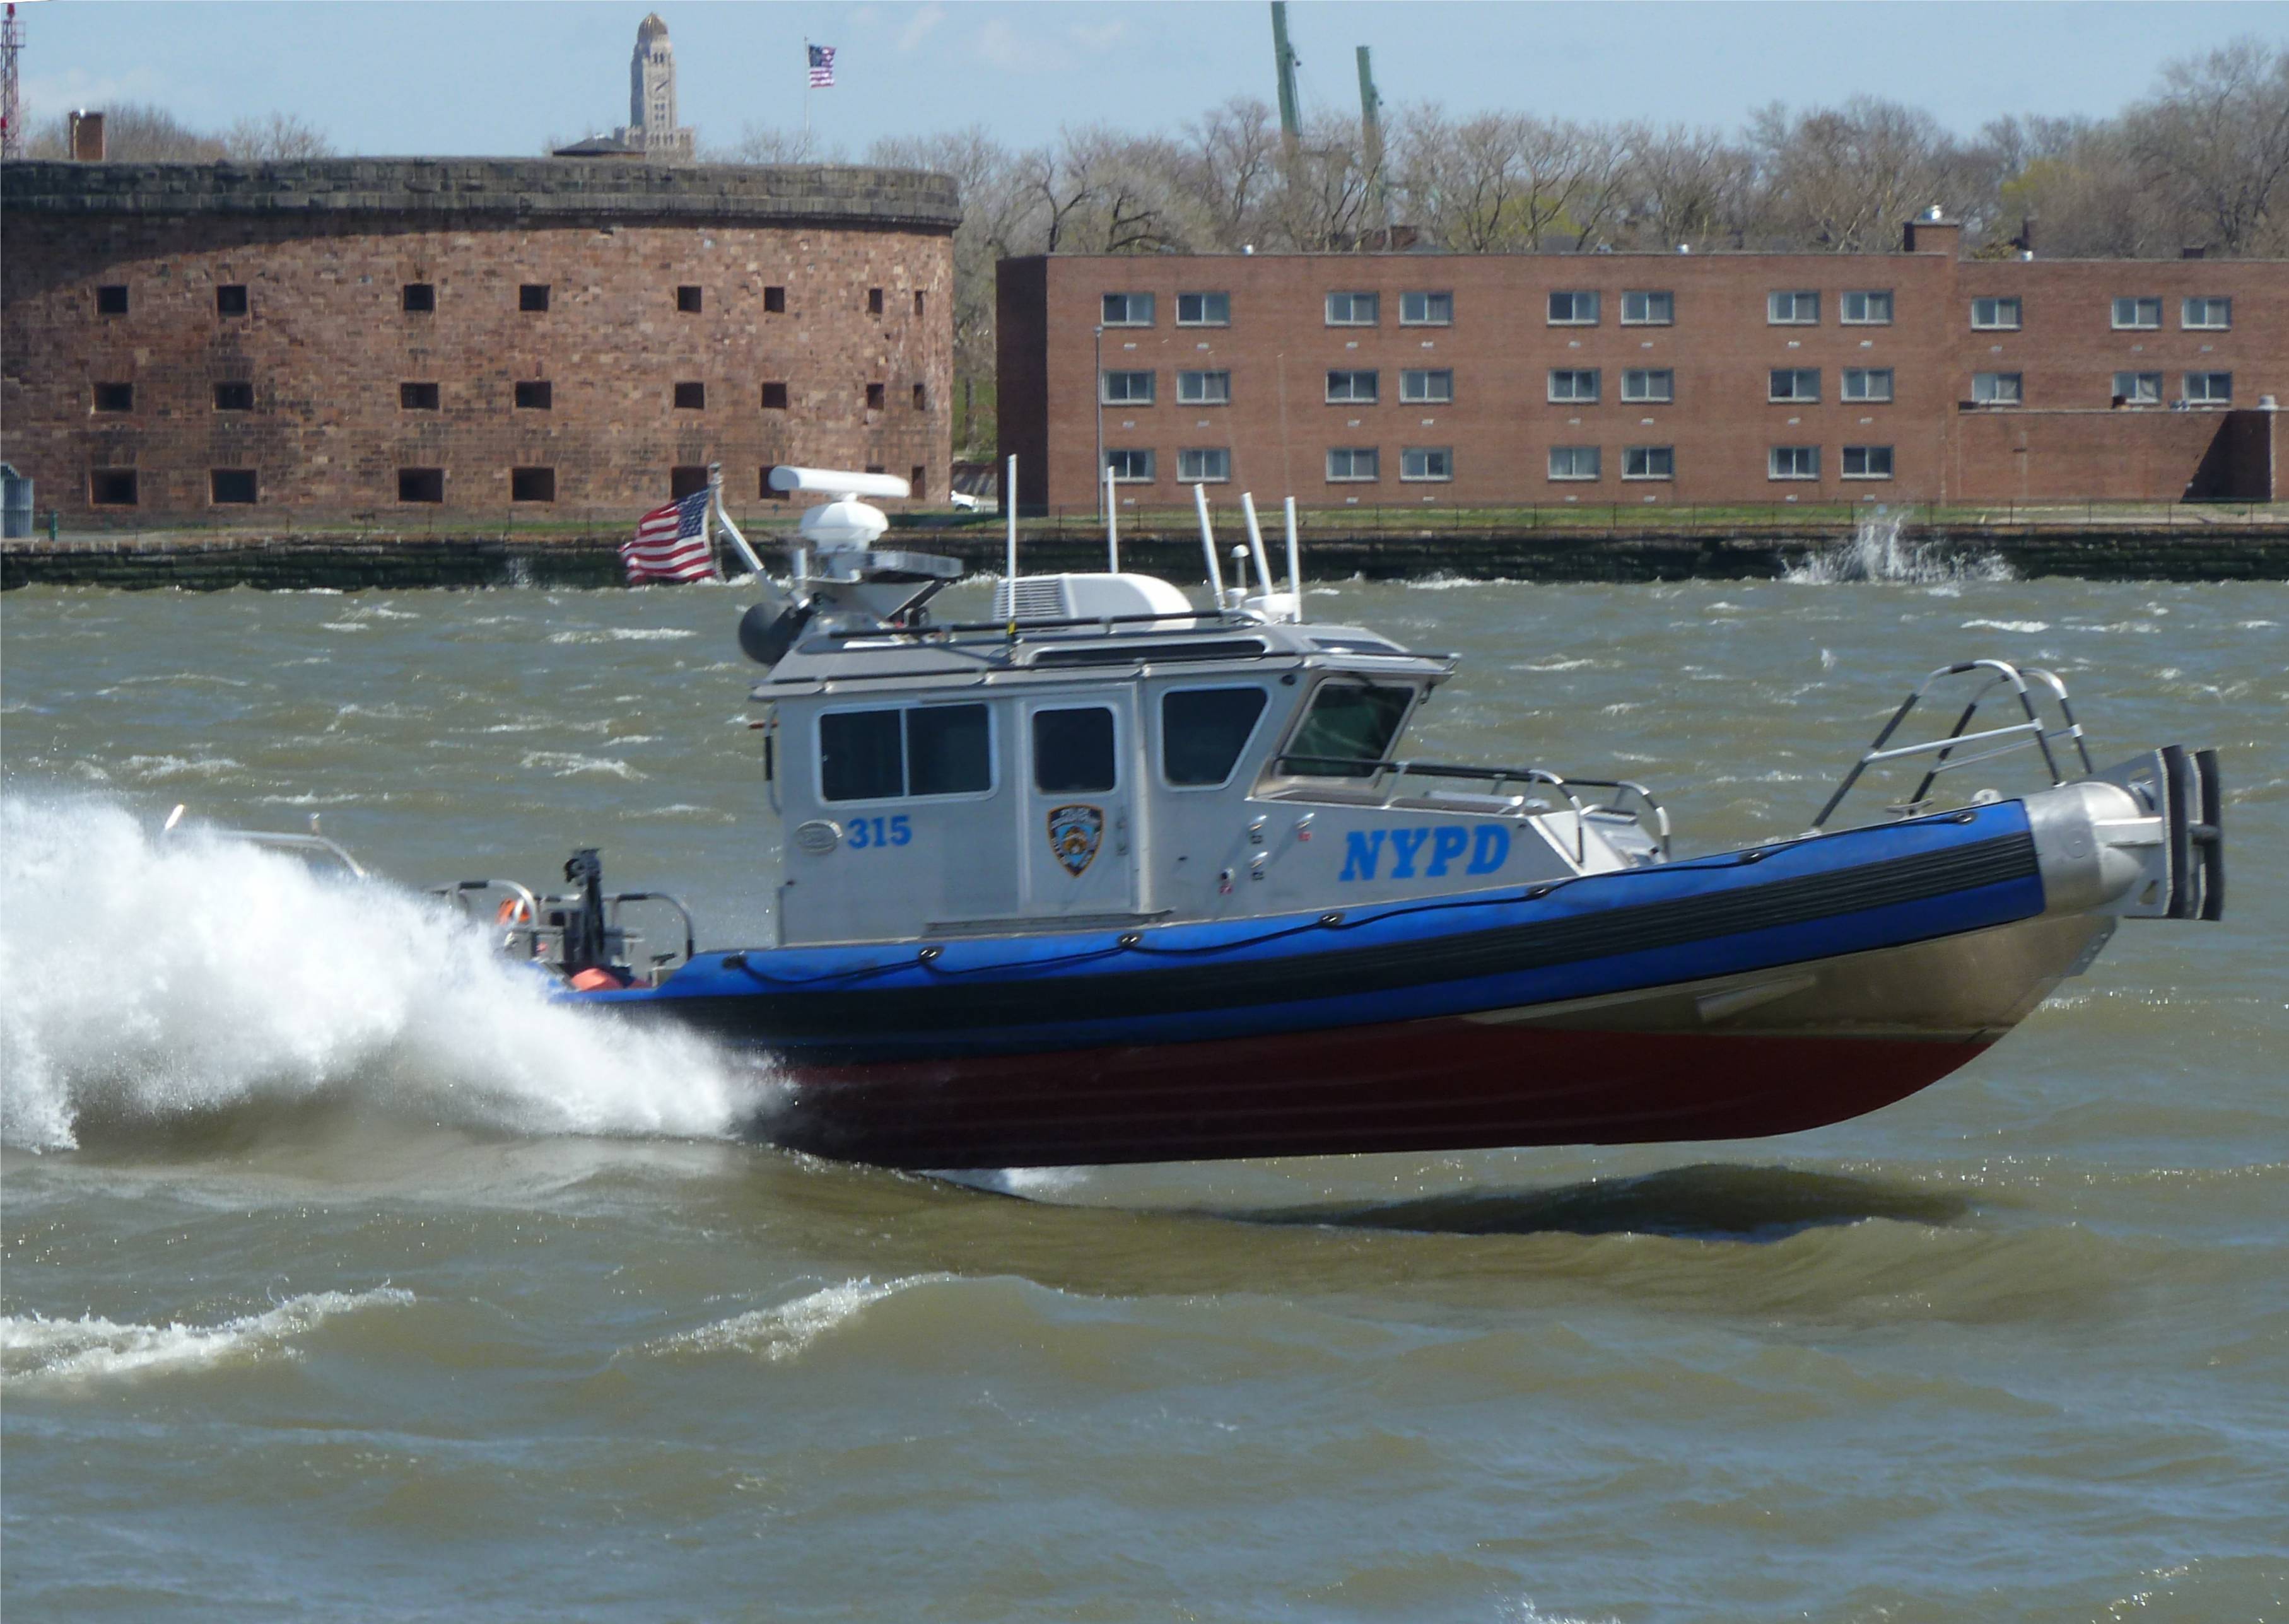 File:NYPD boat near Gov Is.jpg - Wikimedia Commons